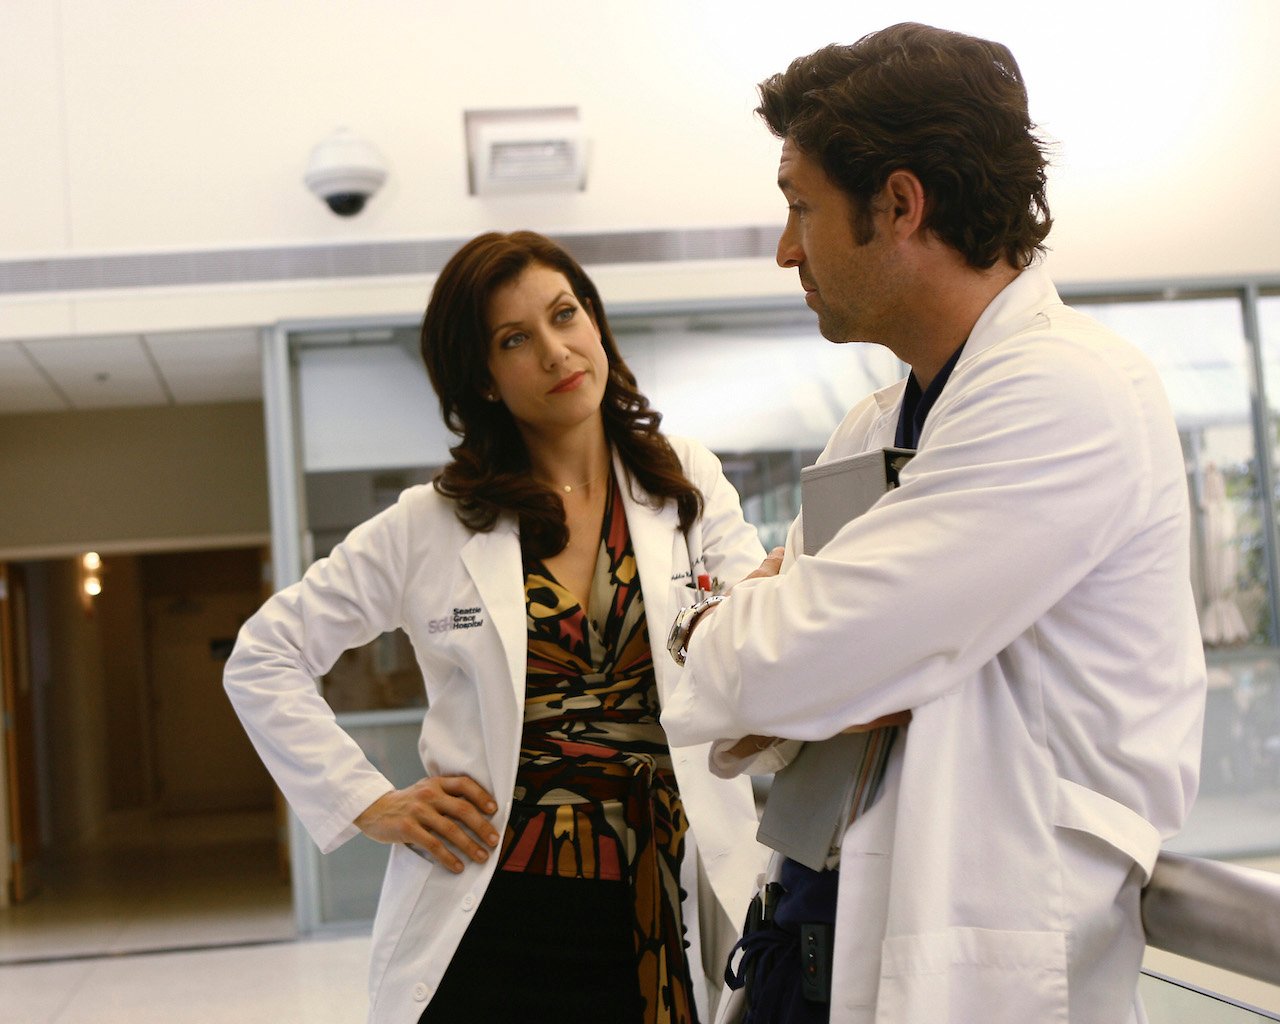 Kate Walsh as Addison Montgomery and Patrick Dempsey as Derek Shepherd on 'Grey's Anatomy' talk in their white coats in a hallway.